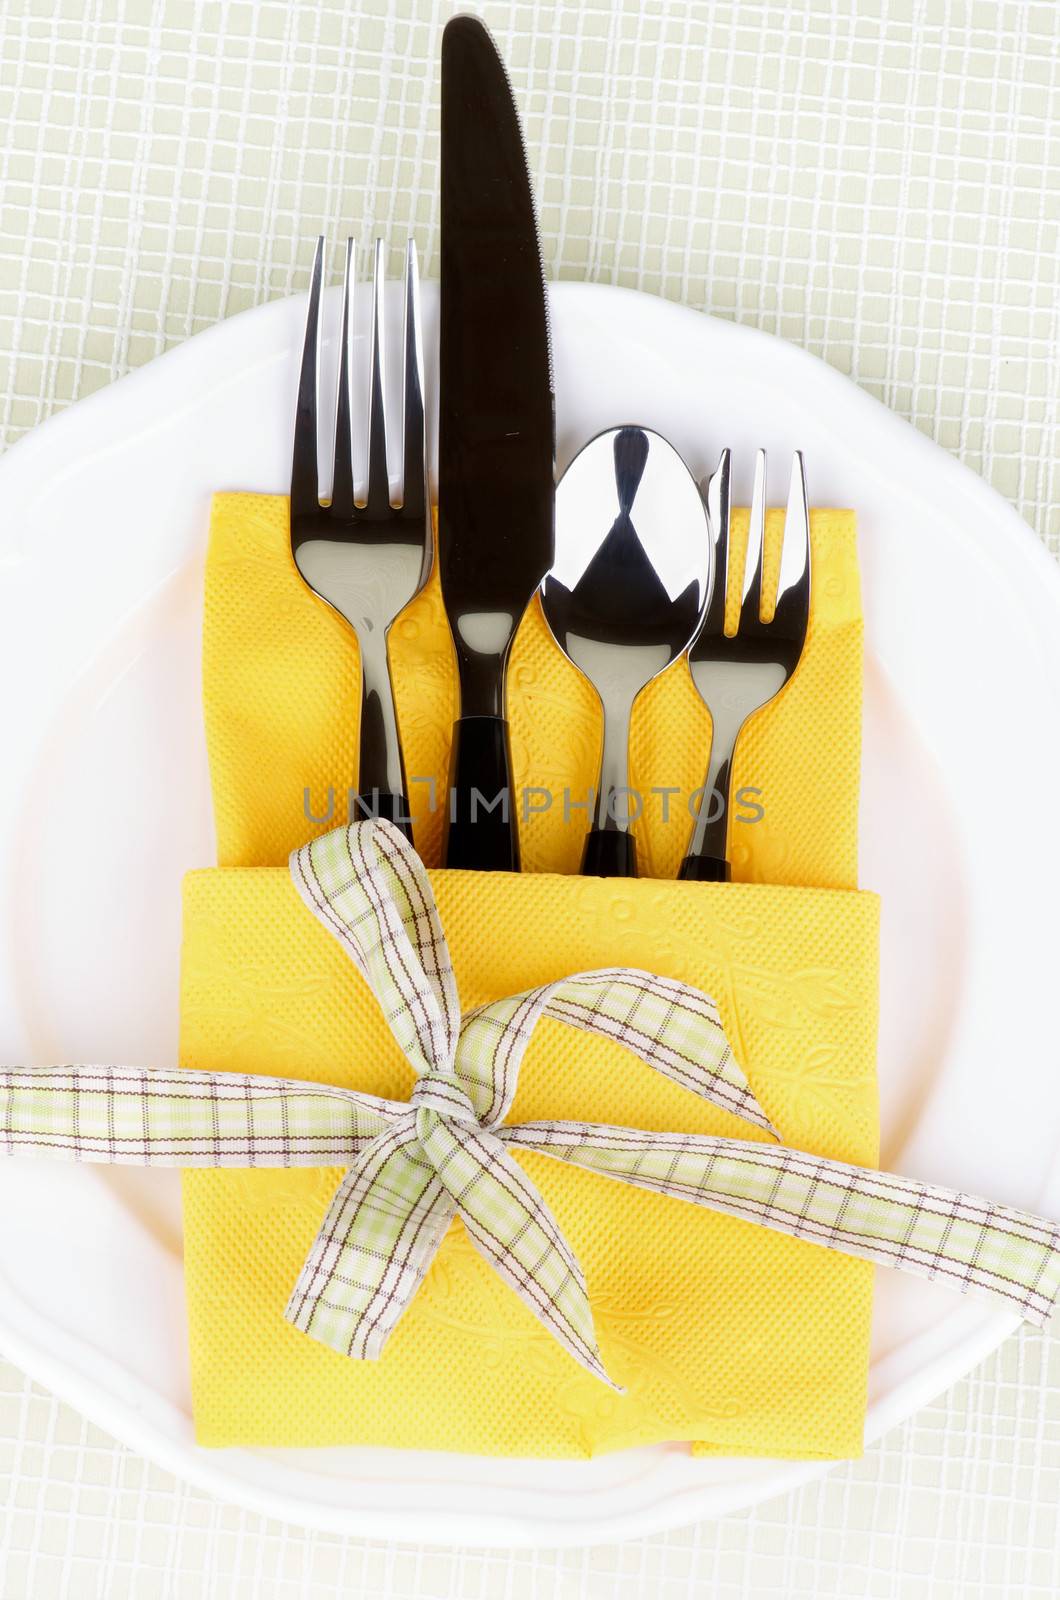 Elegant Table Setting with Fork, Table Knife, Spoon and Dessert Fork into Yellow Napkin Decorated with Green Checkered Bow on White Plate